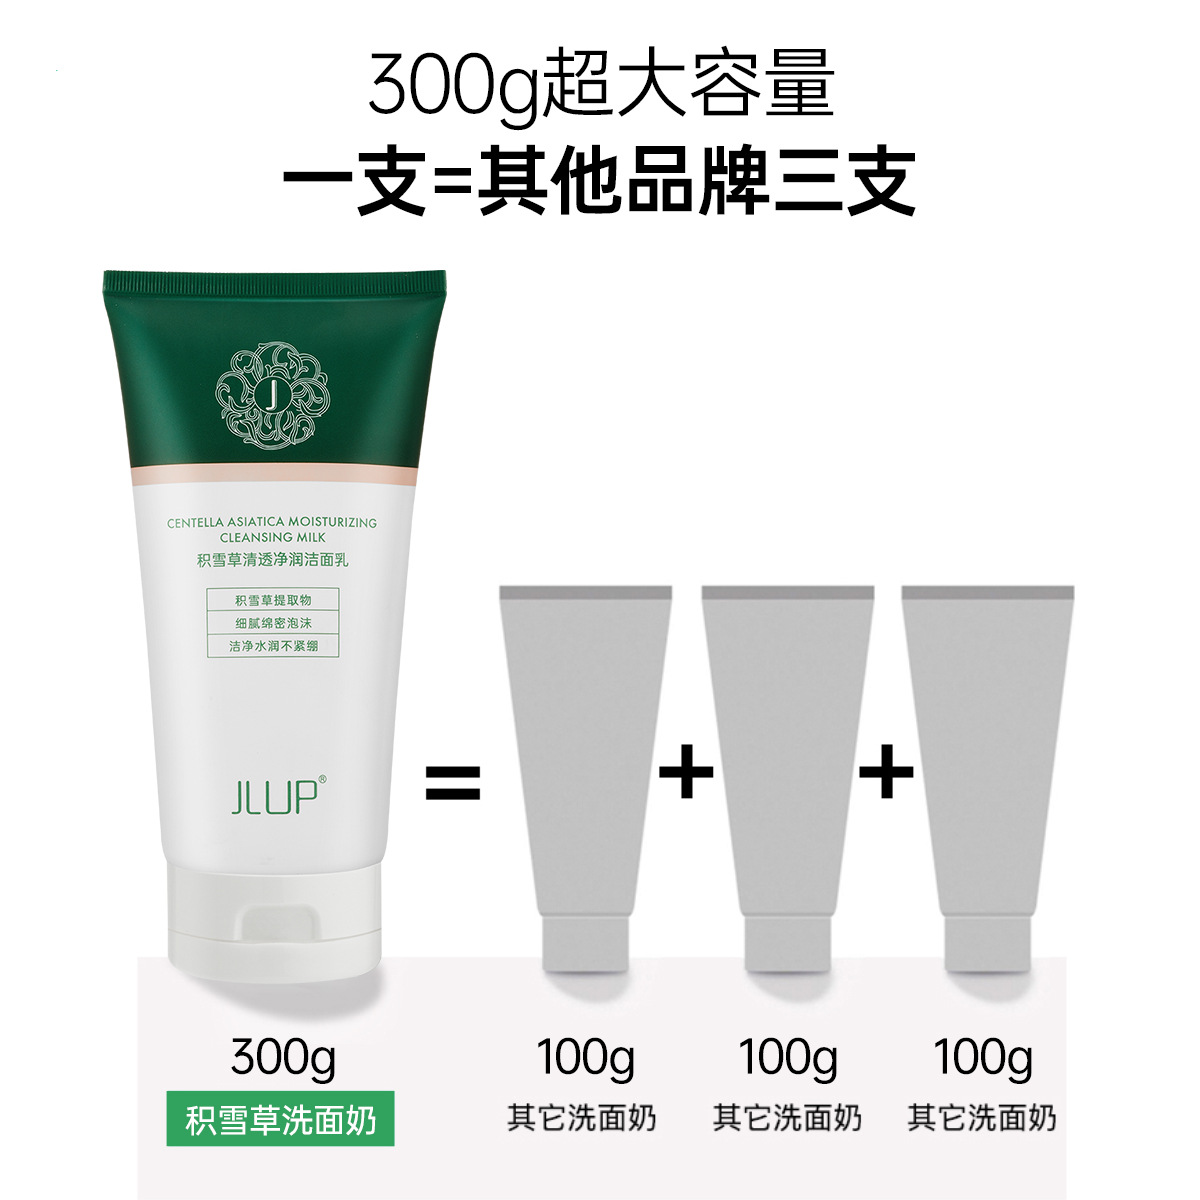 JLUP facial cleanser unisex mild oil control deep cleansing moisturizing hydrating Centella asiatica facial cleanser genuine goods batch